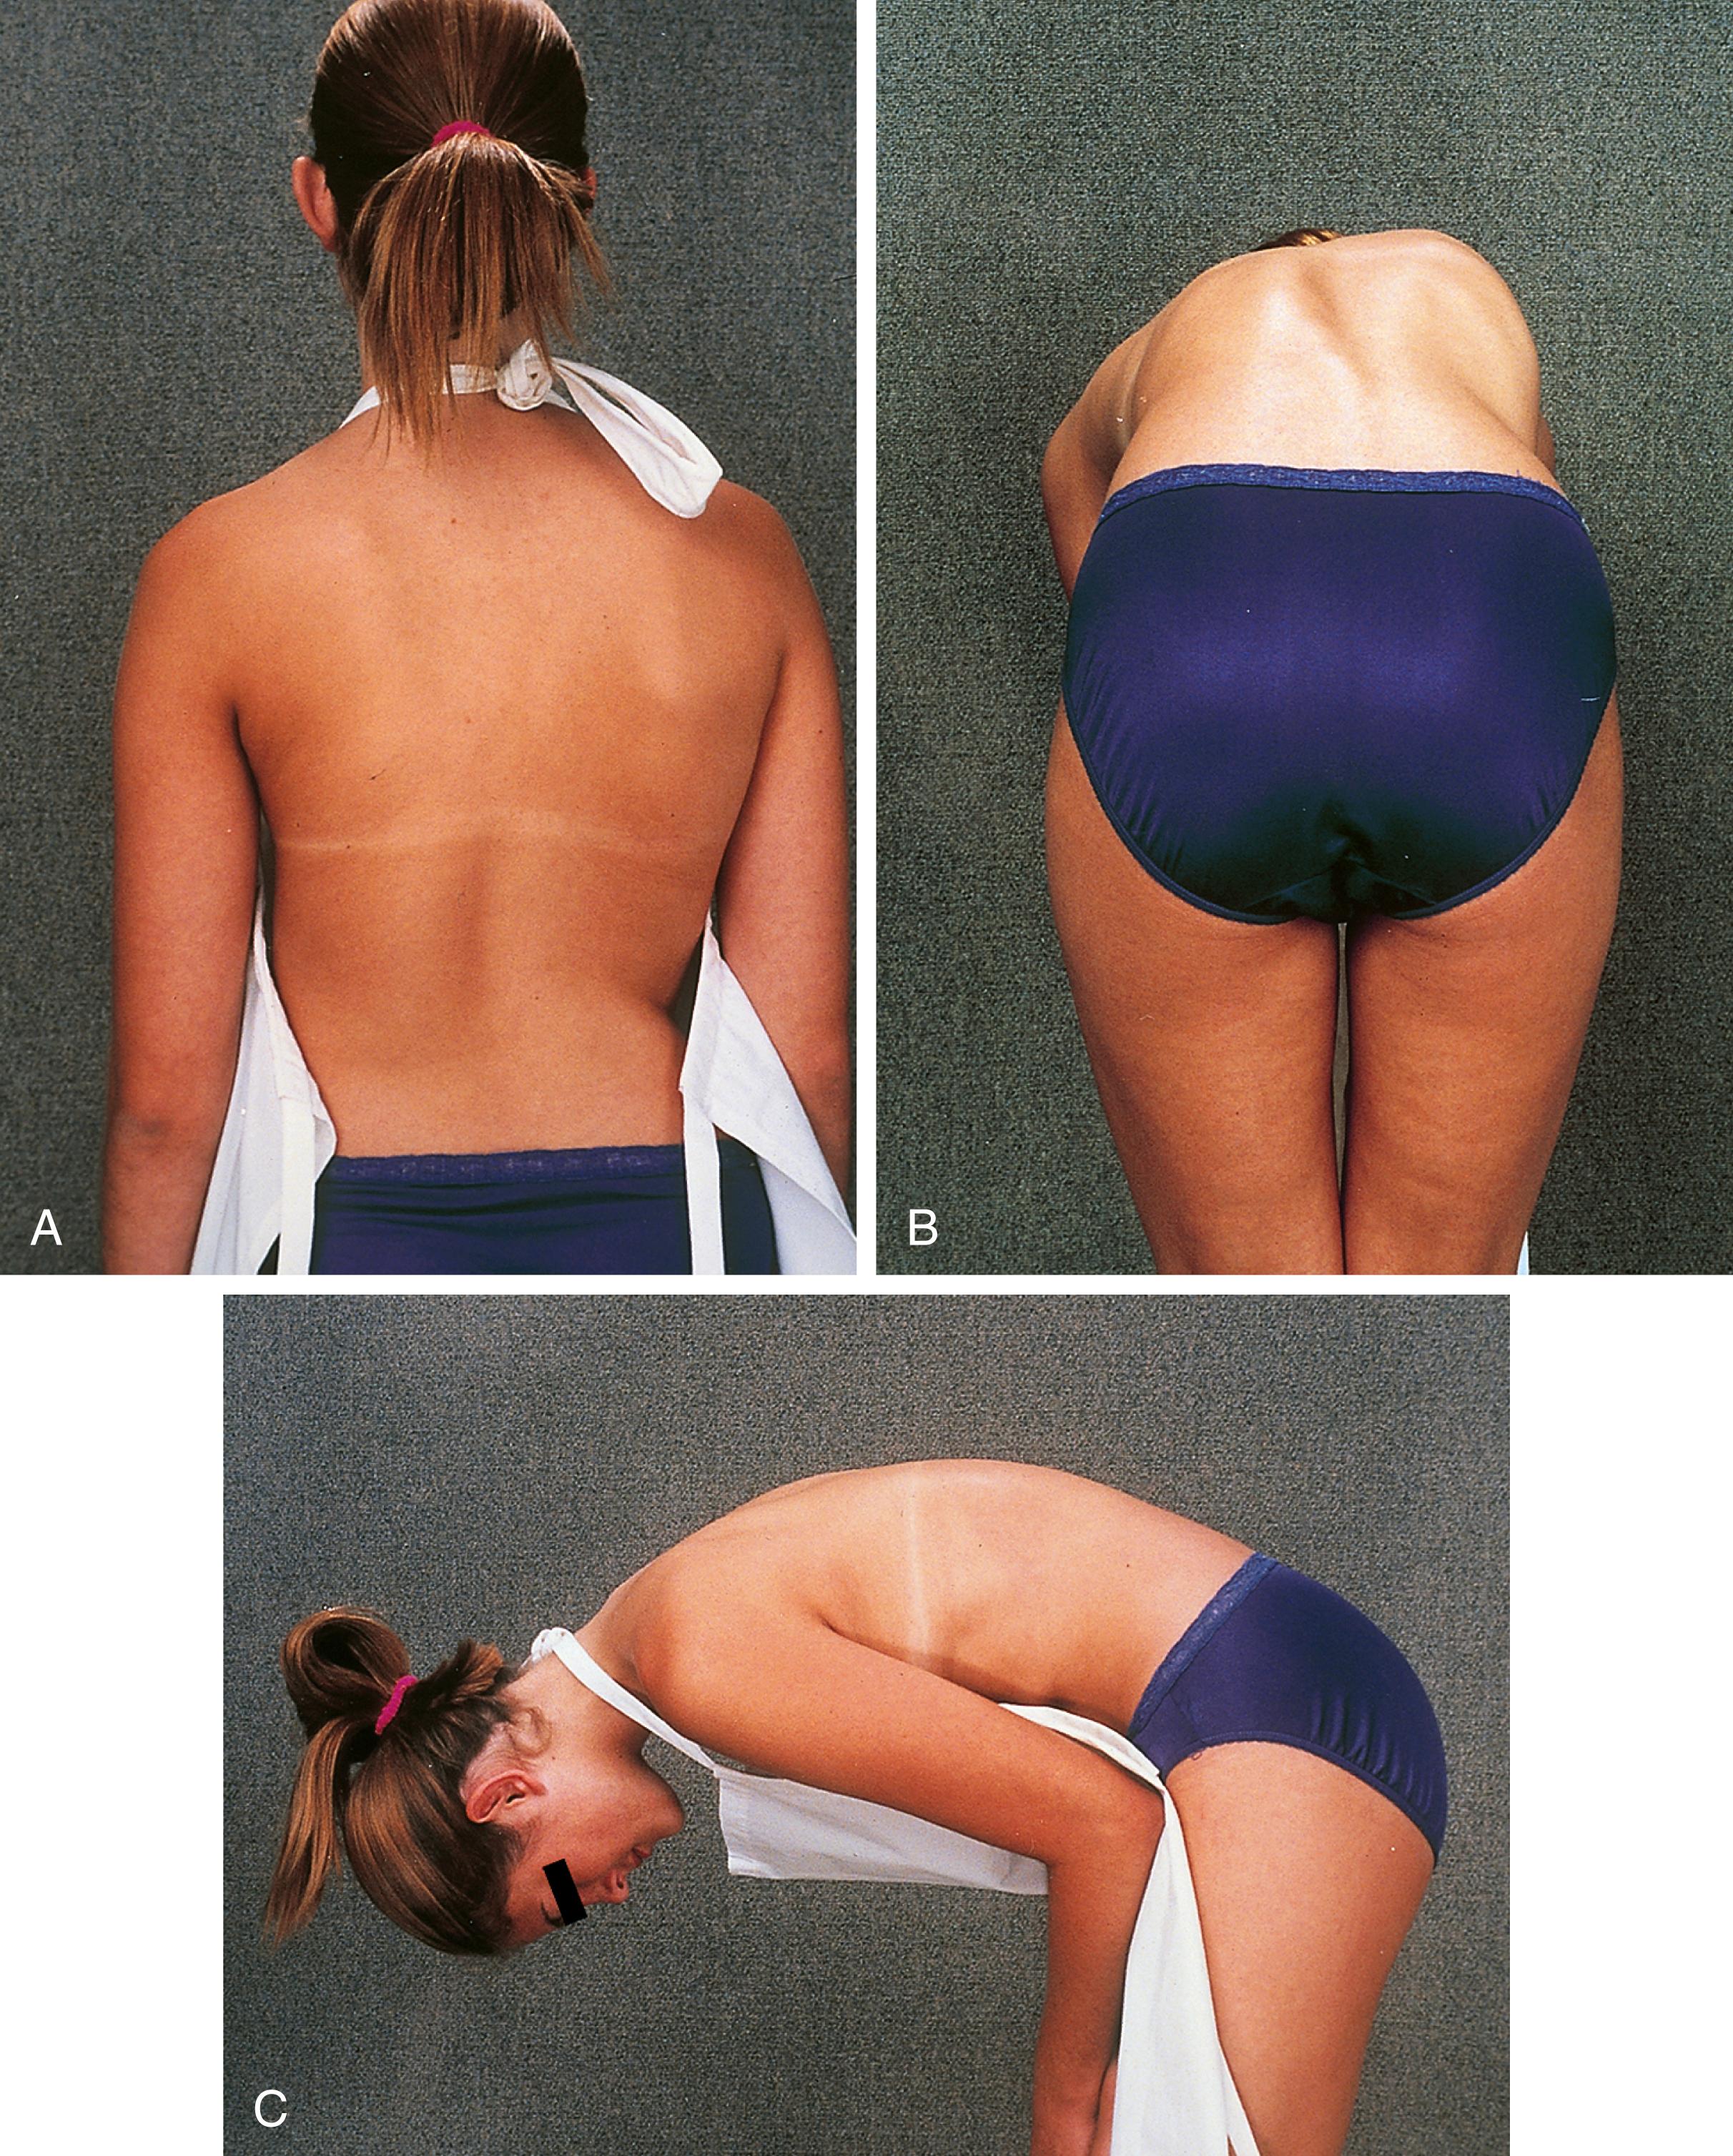 Fig. 22.4, Adams forward bend test. (A) Scoliosis can be difficult to detect on observation of the standing patient. (B) With the child bending forward and observed from behind, it is much easier to appreciate the asymmetrical trunk rotation seen in scoliosis. (C) Viewing the patient from the side, one can more easily see even subtle degrees of kyphosis and note lack of reversal of normal lordosis.